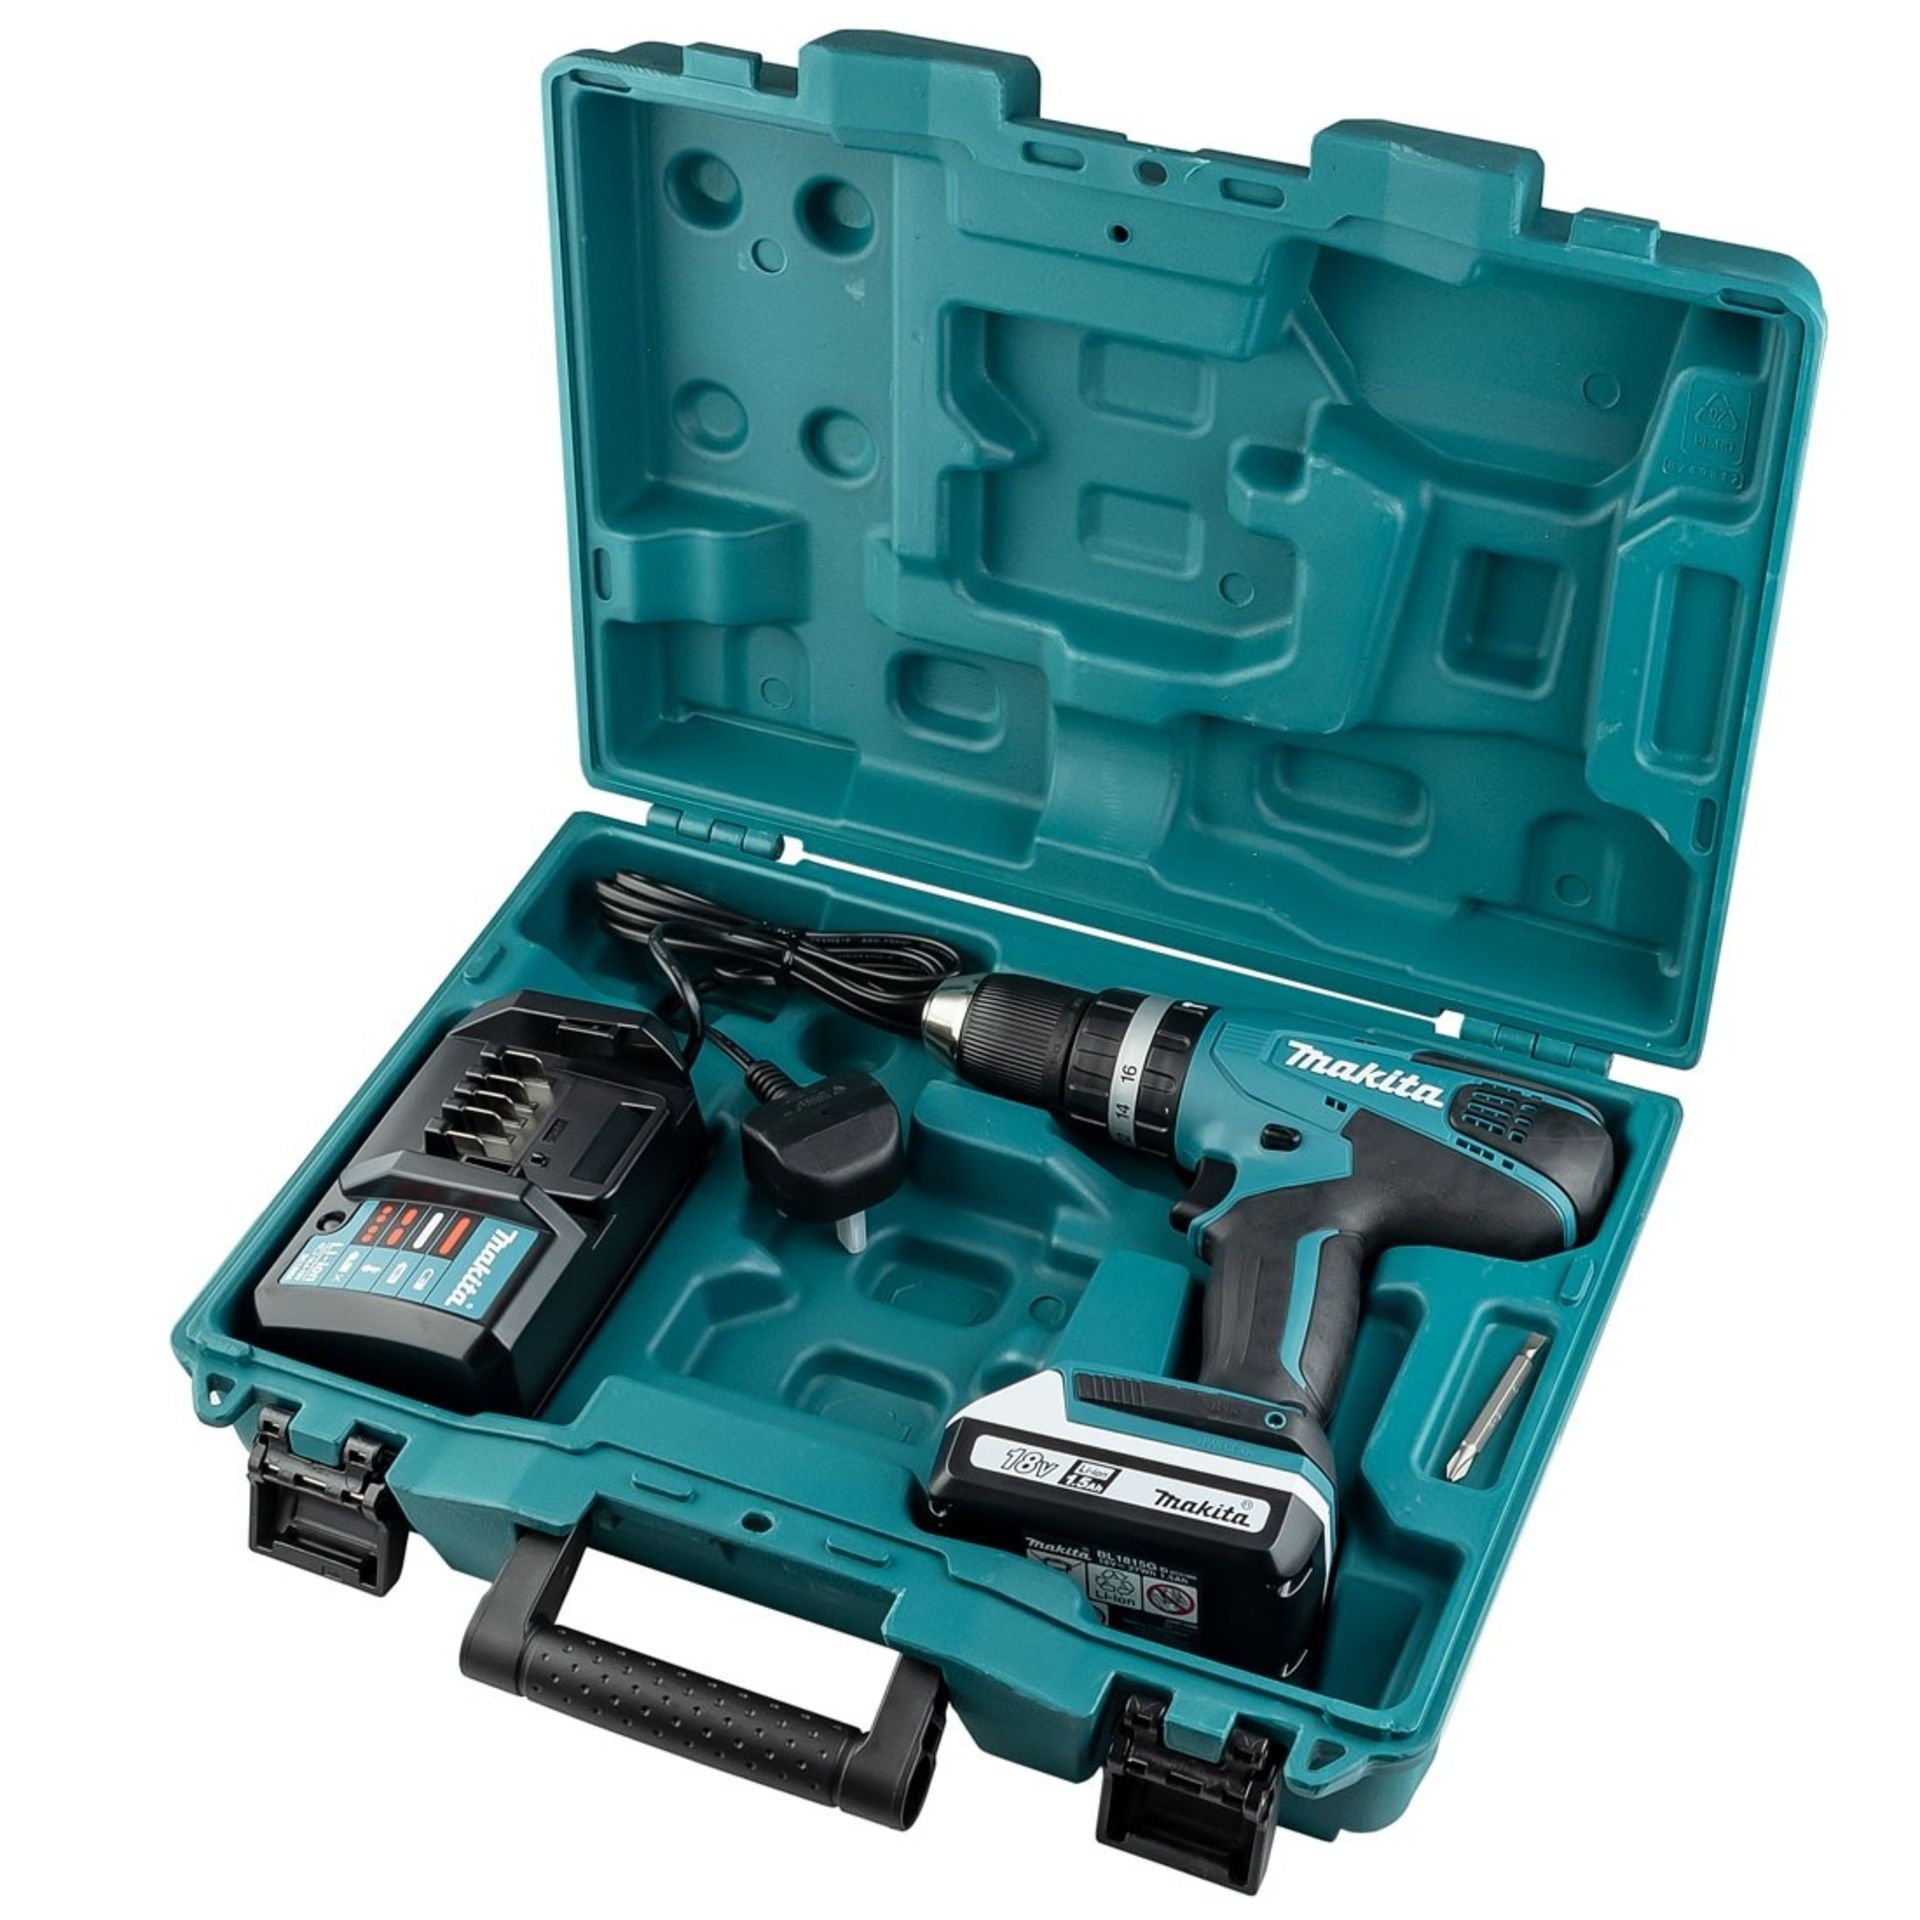 V Brand New Makita 18v Cordless Hammer Drill With Battery And Charger And Case